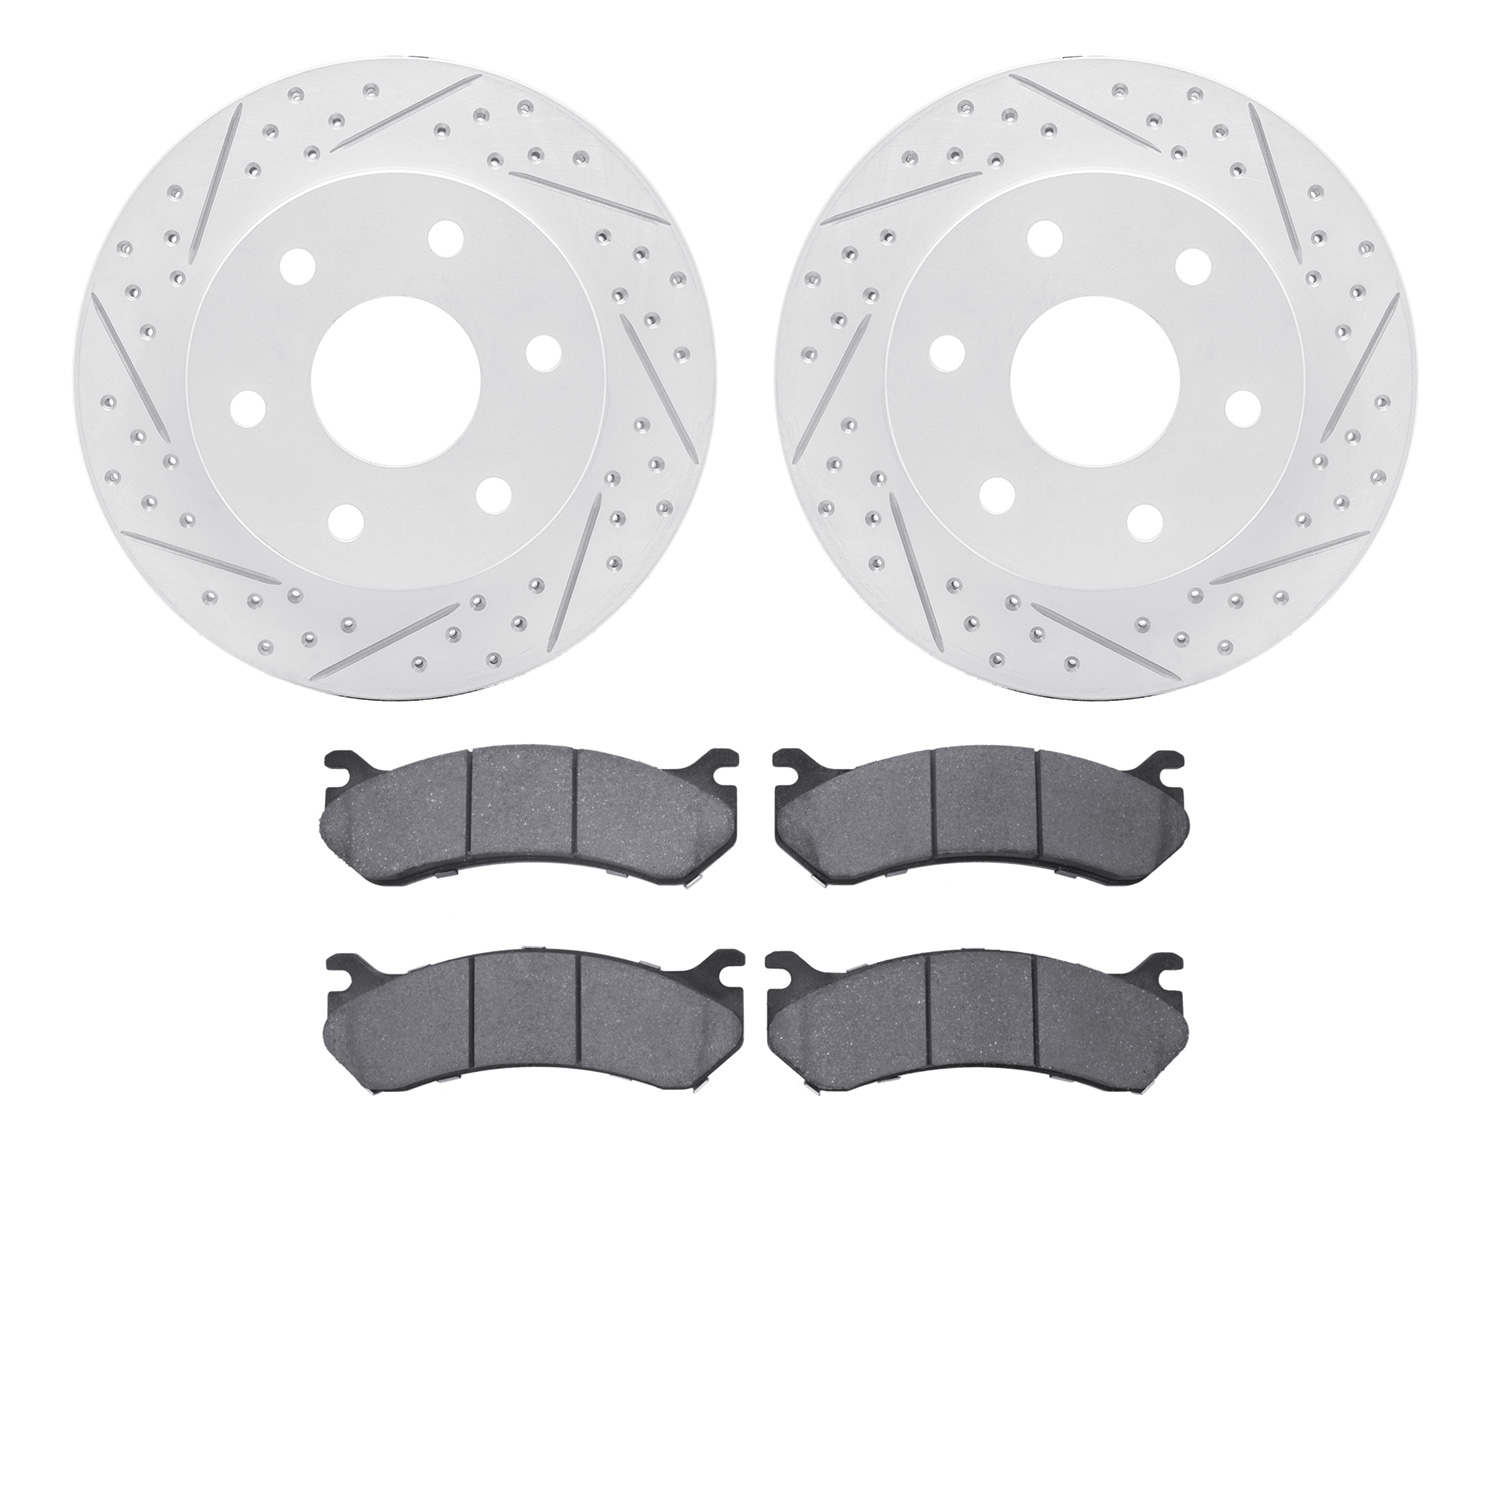 Geoperformance Drilled/Slotted Rotors w/Heavy-Duty Pads Kit,